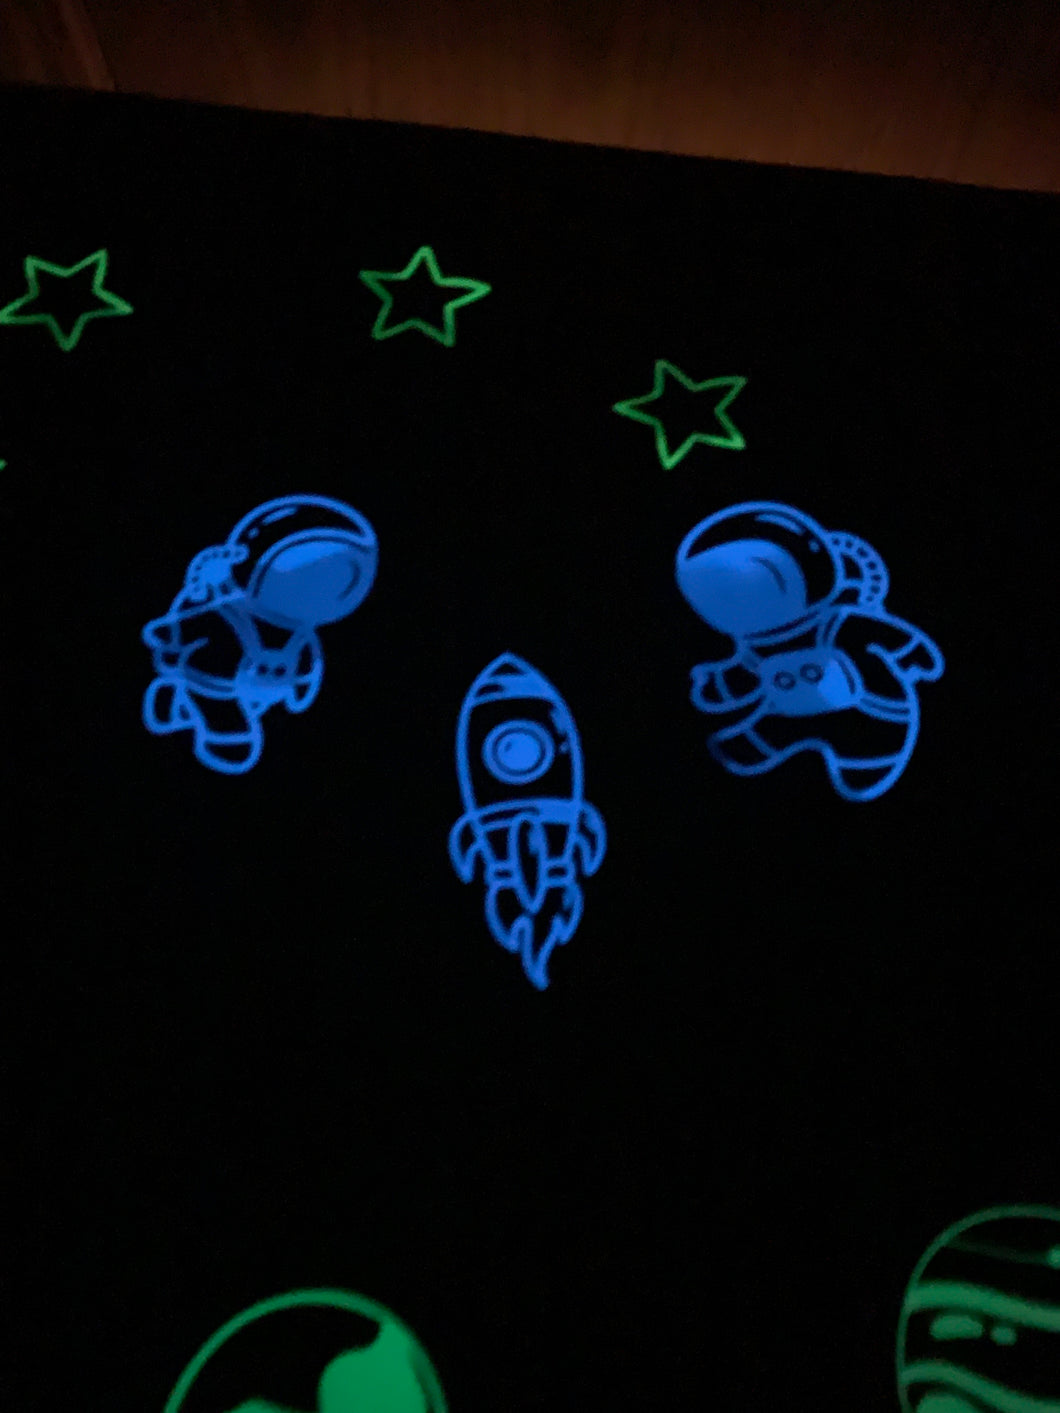 Glow in the Dark “Let's Go to Space